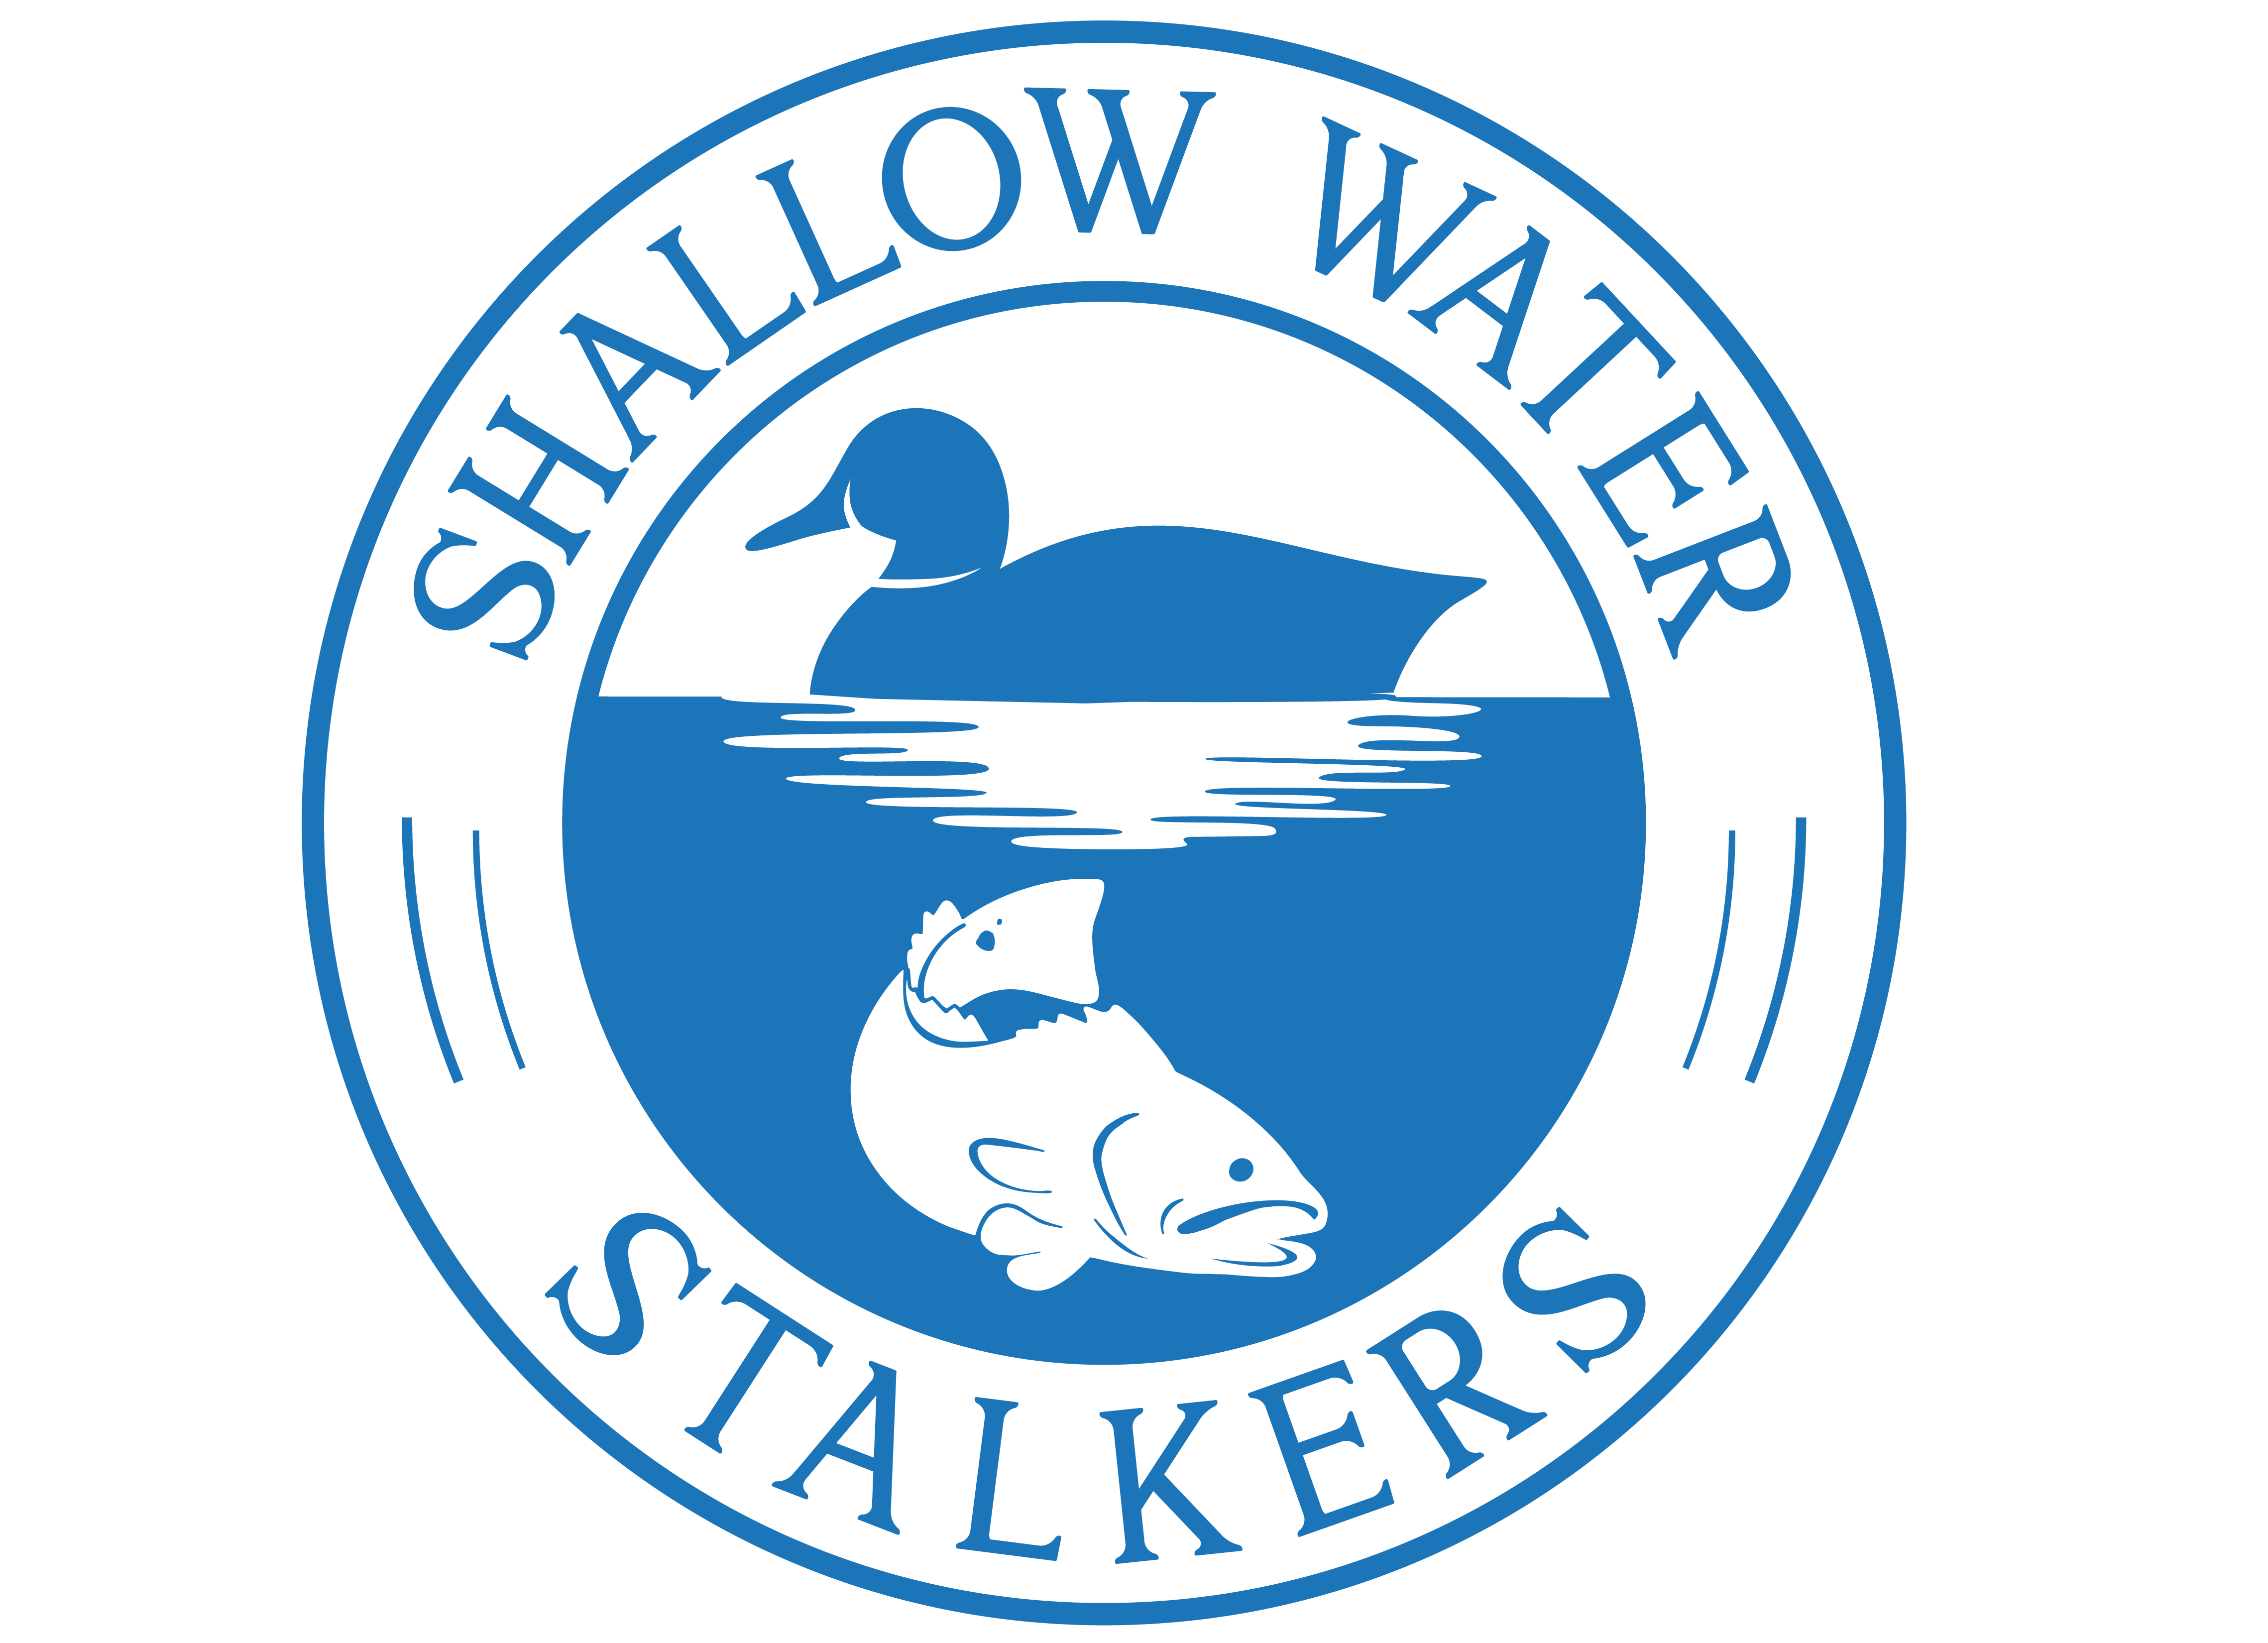 Shallow Water Stalkers